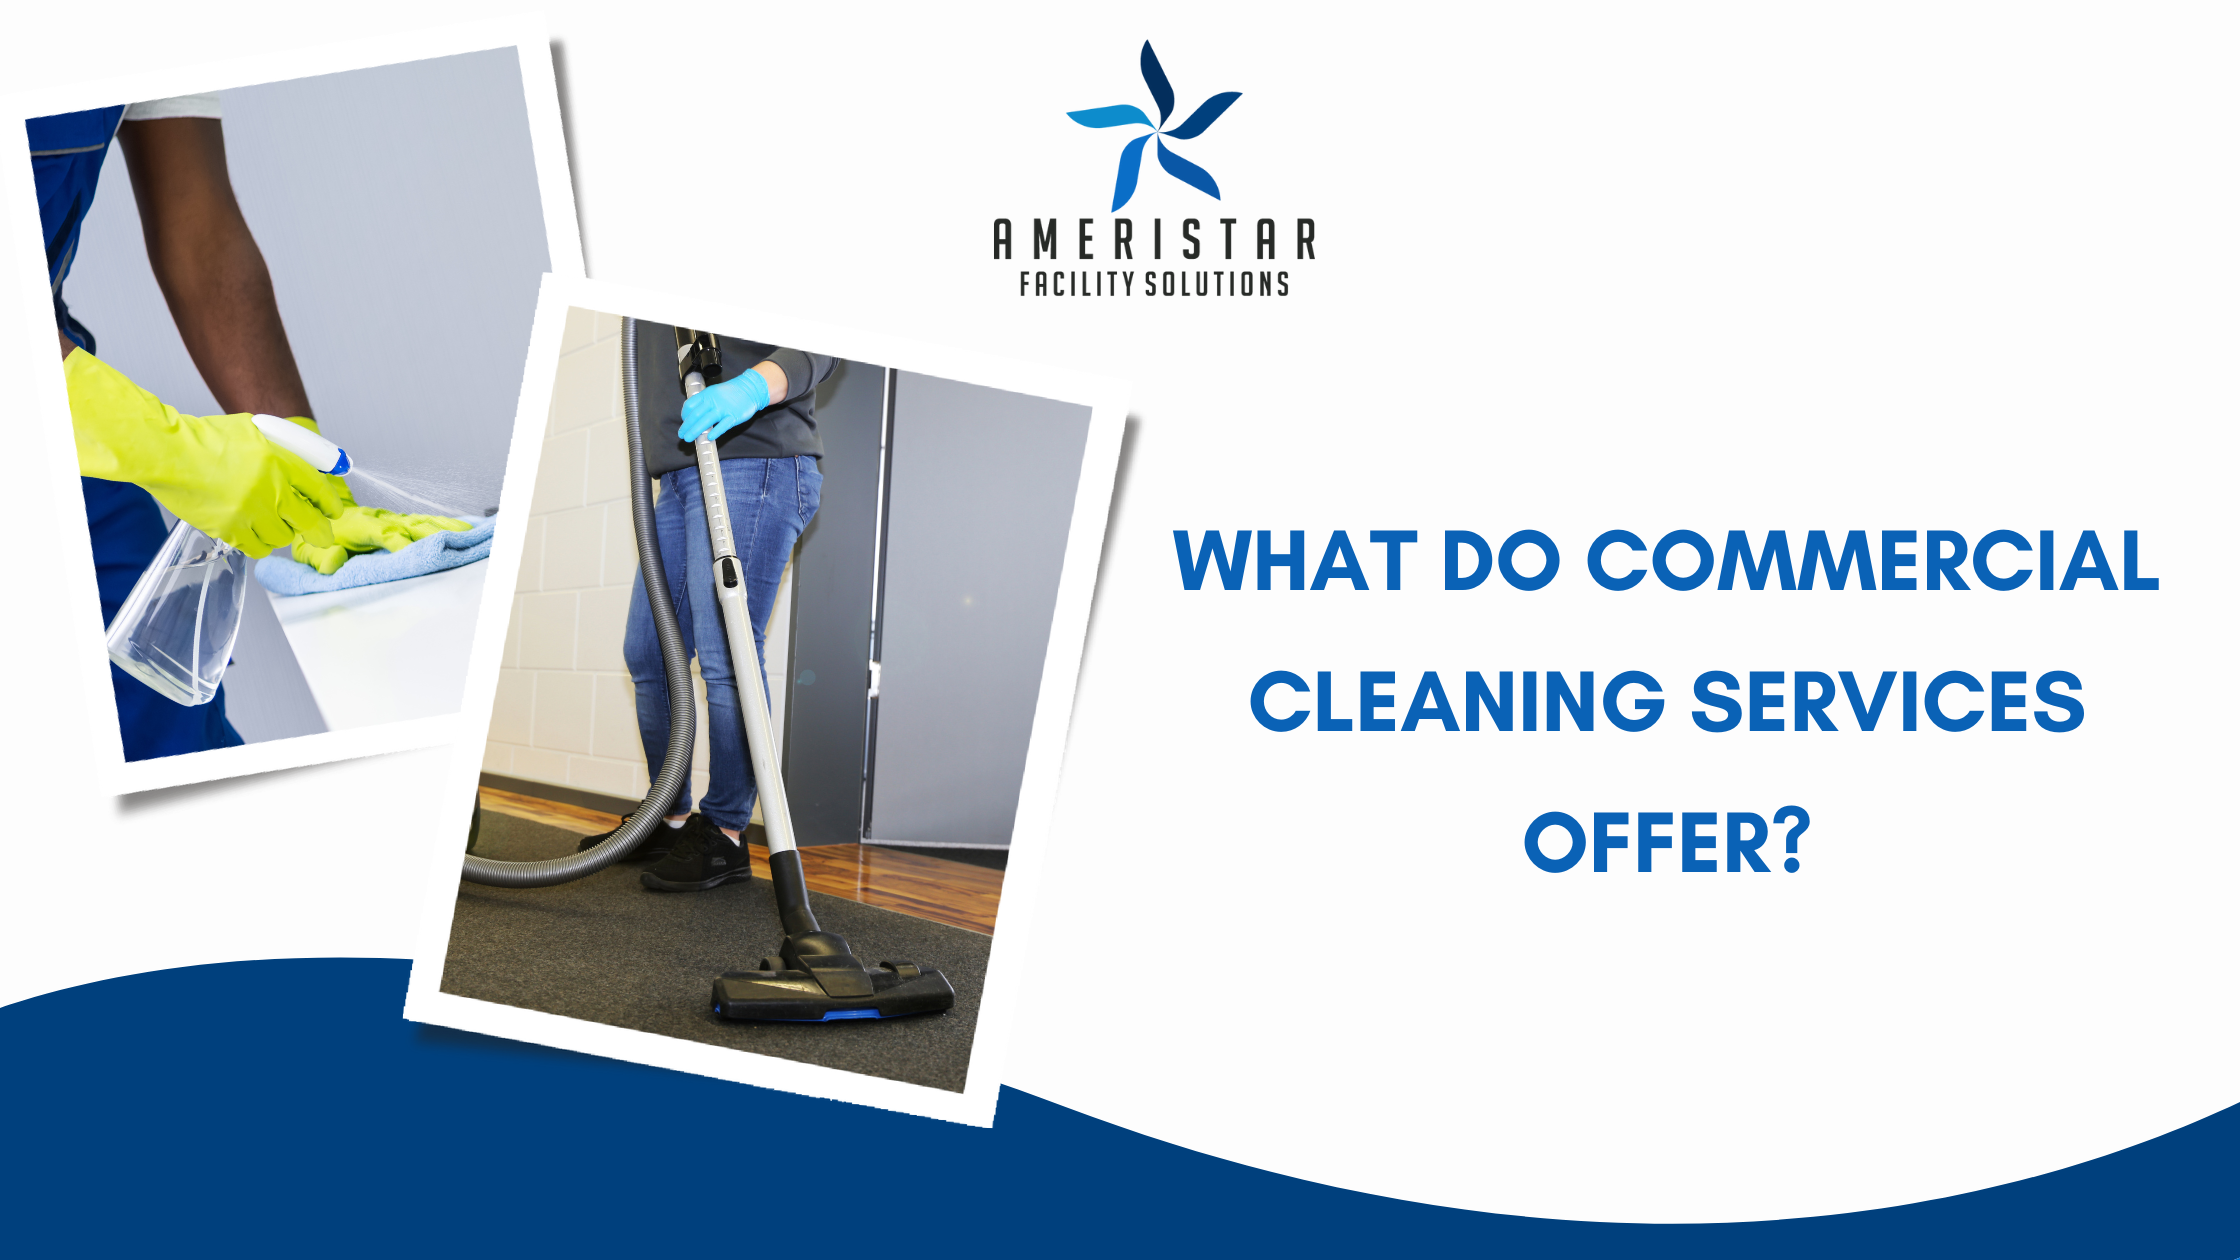 What Do Commercial Cleaning Services Offer